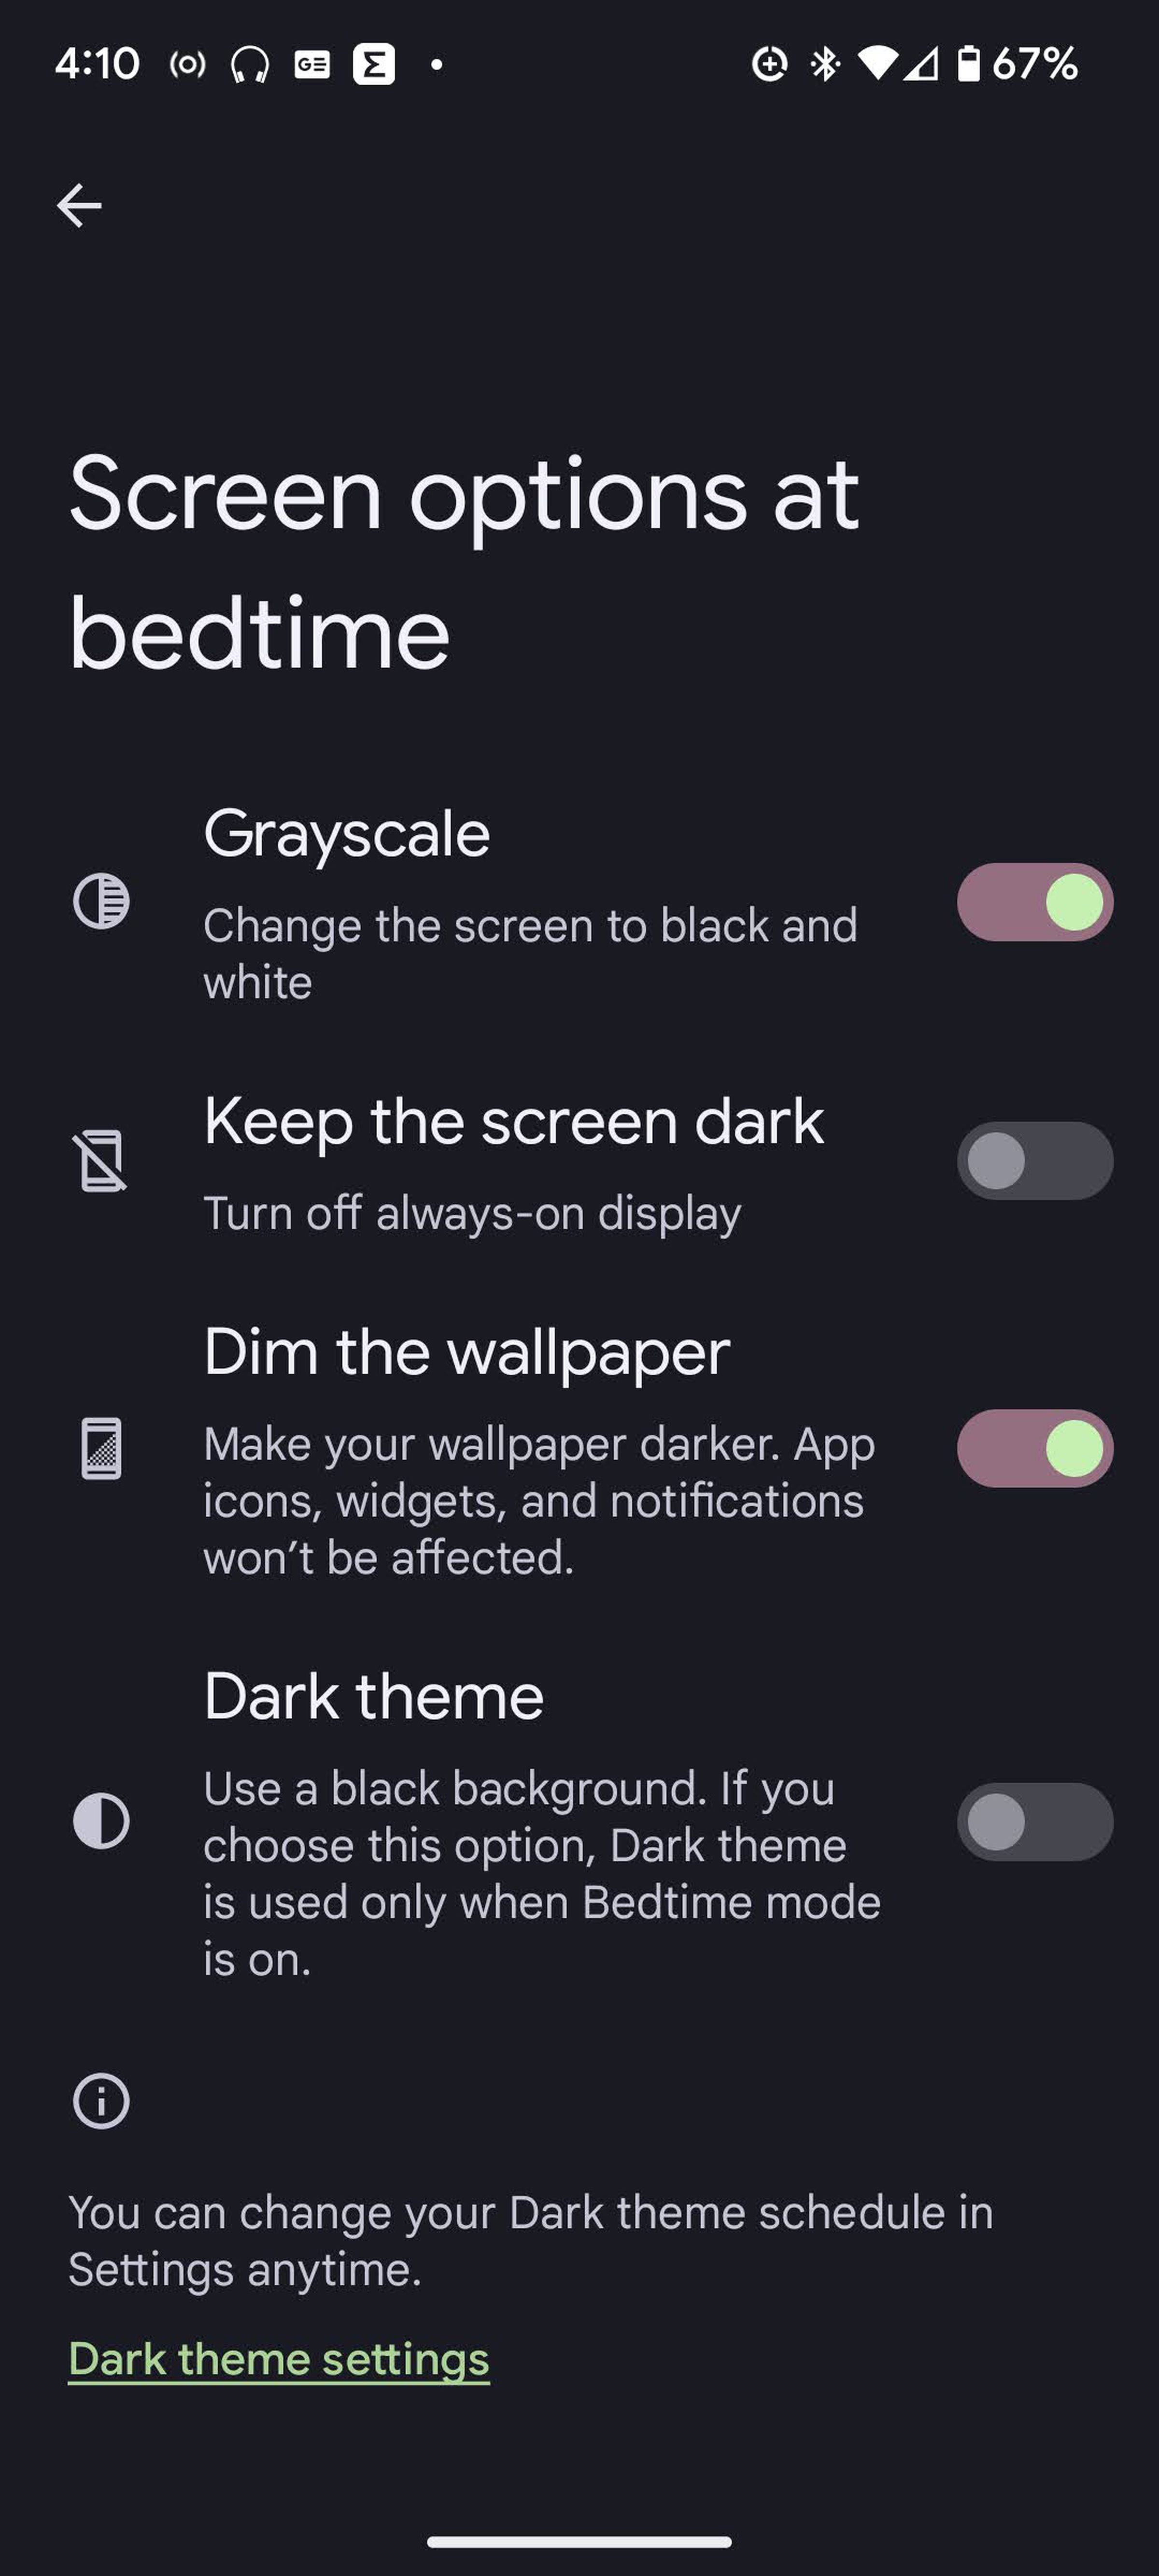 Menu for screen options at bedtime, including grayscale, keep the screen dark, dim the wallpaper, and dark theme